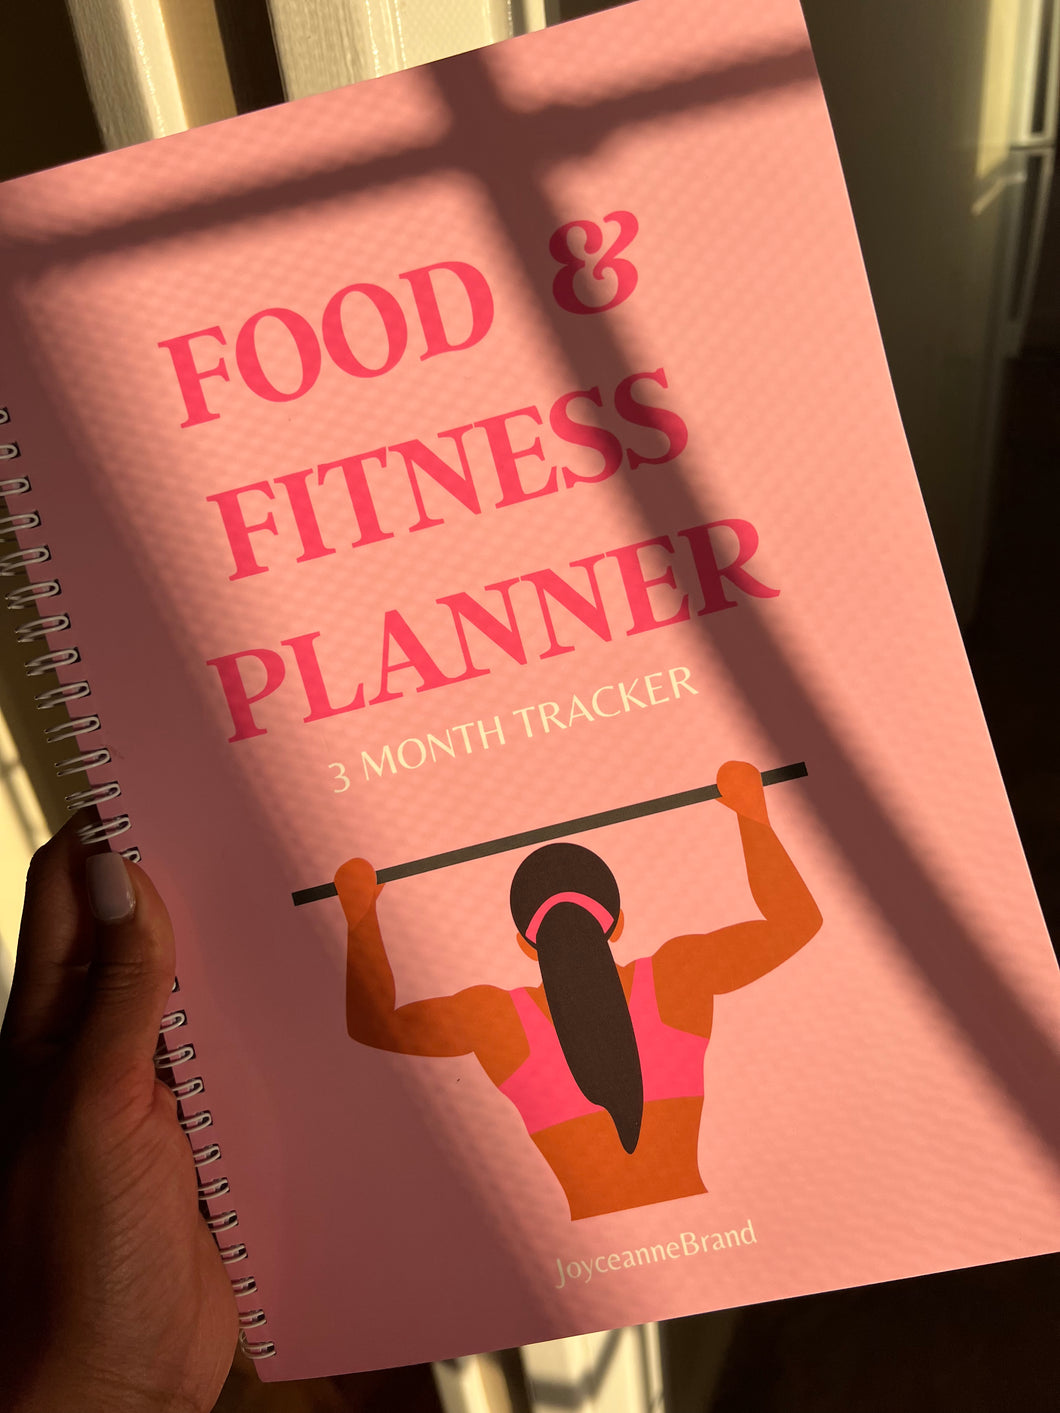 Physical Food and fitness planner (3 month planner)